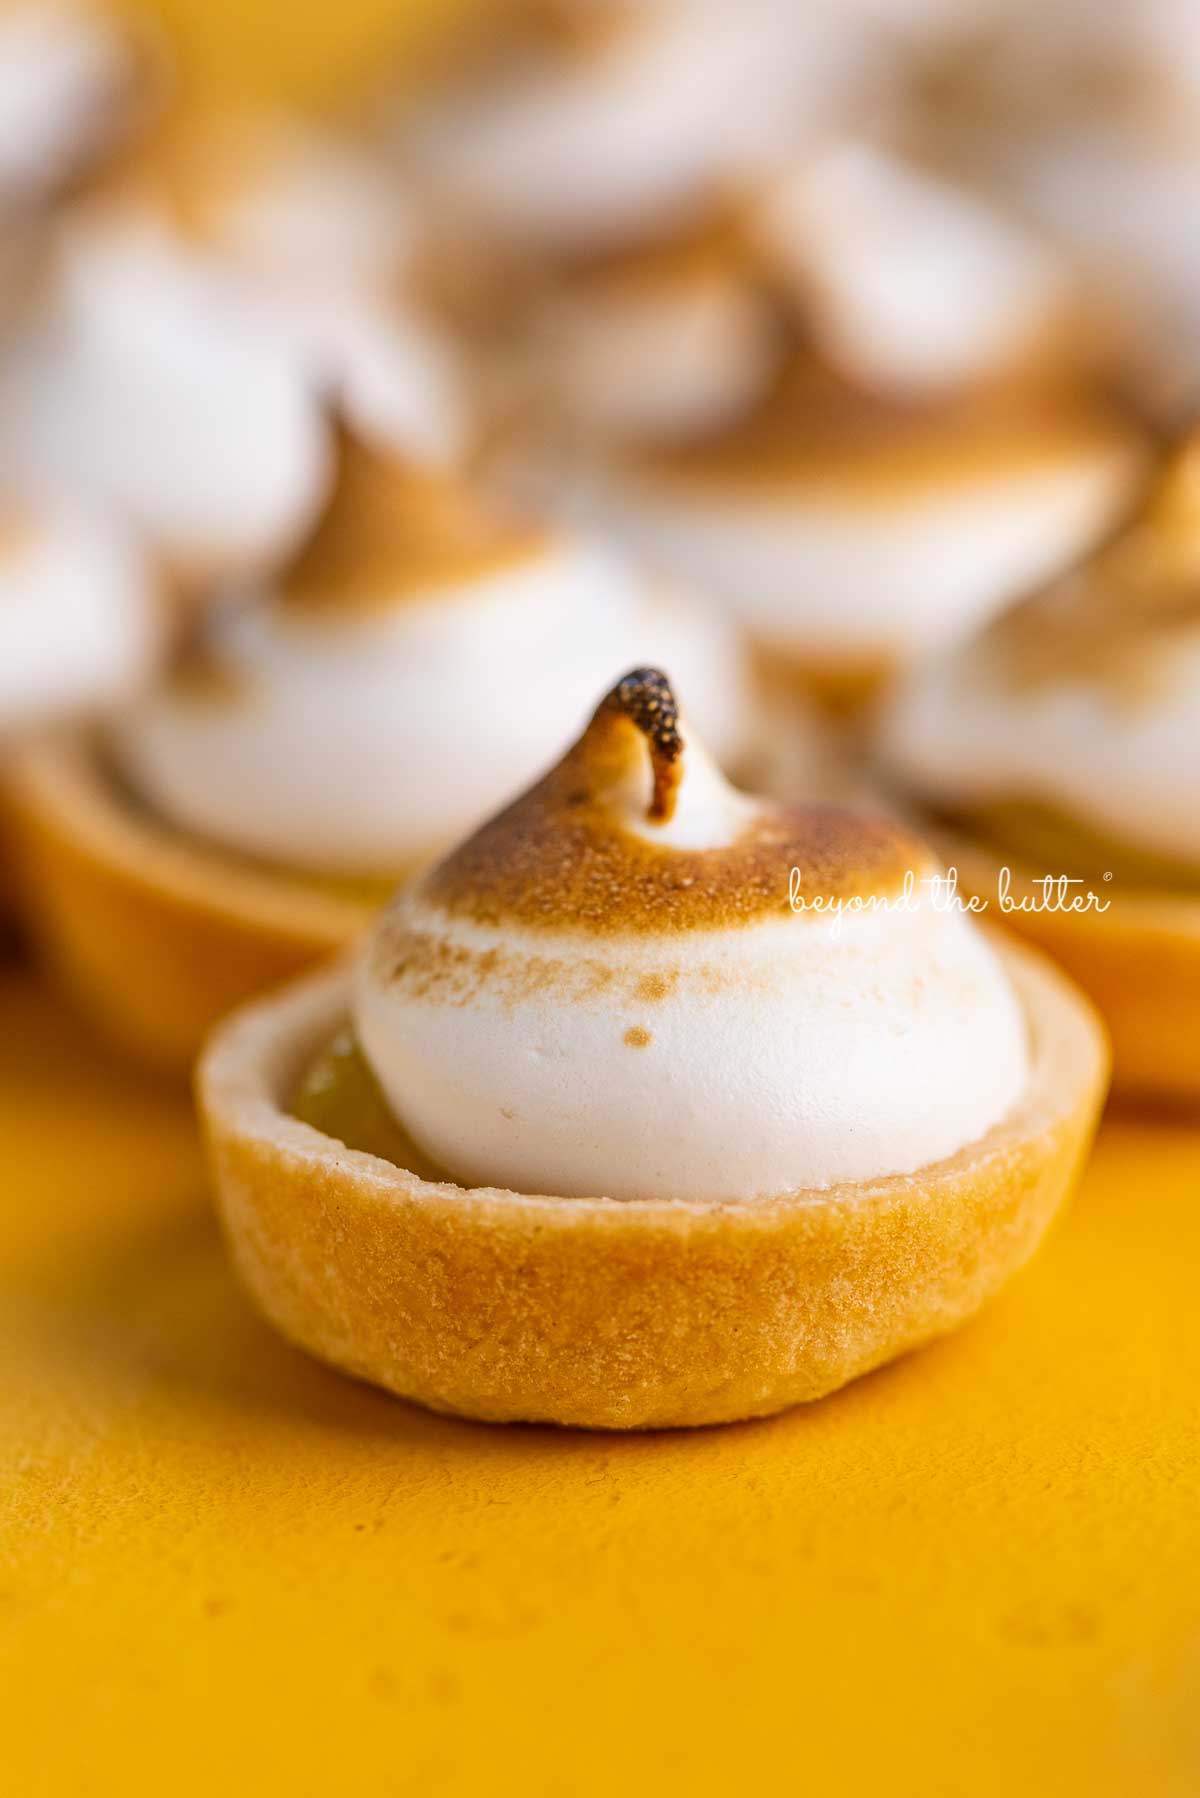 Mini lemon meringue pies on a yellow background | © Beyond the Butter®